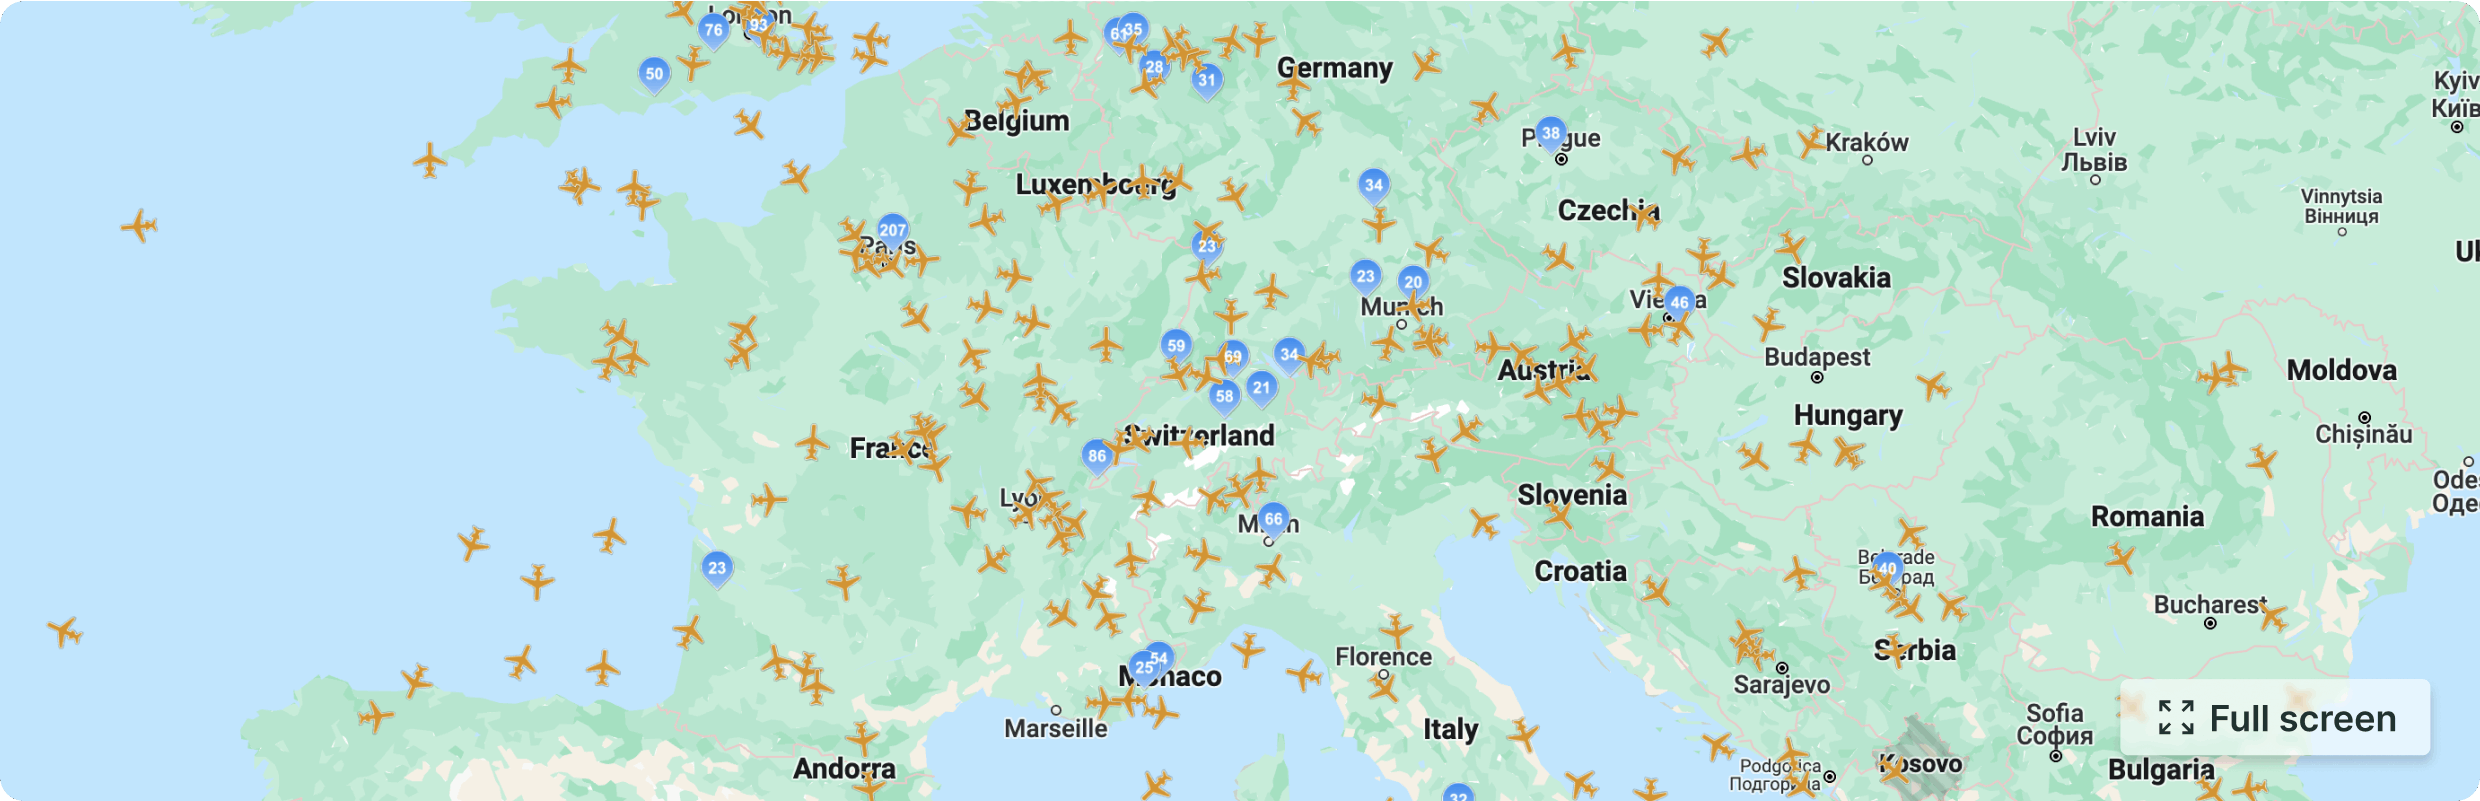 Private jet flight status management with flight tracker and live maps